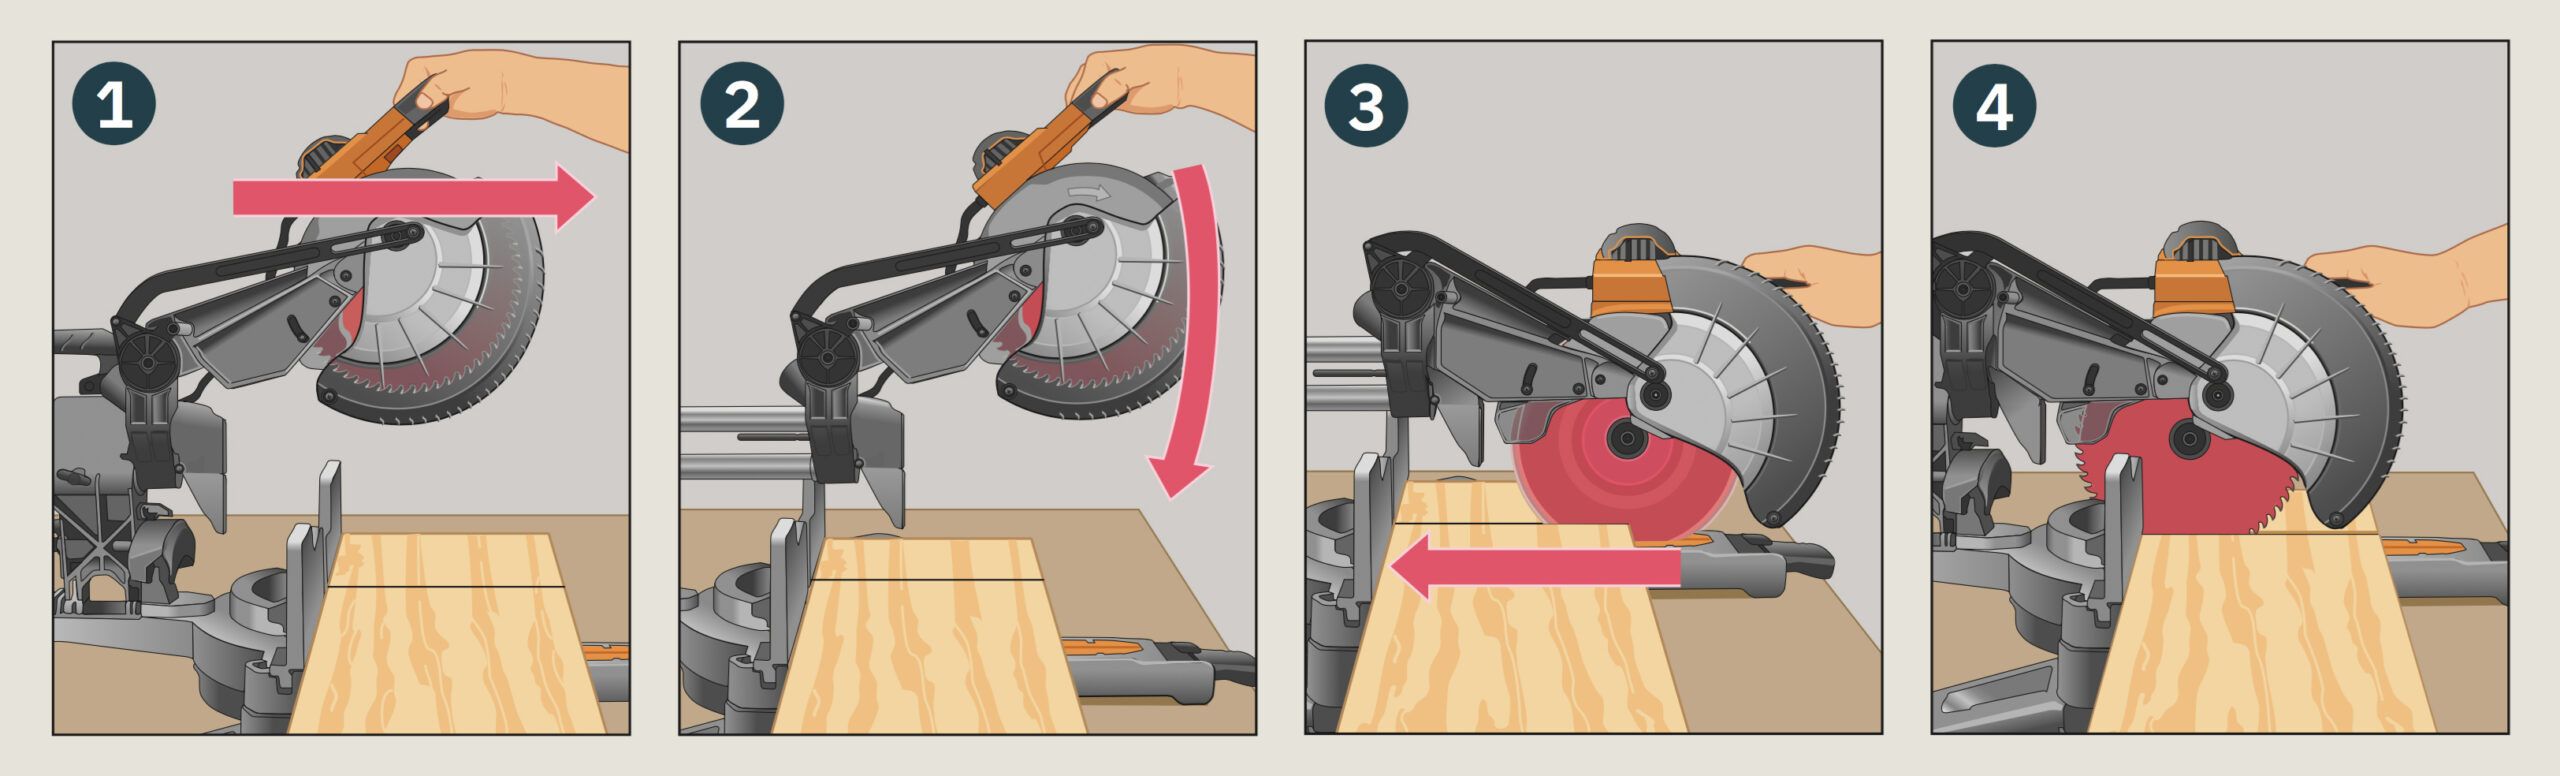 How To Tune Up And Use A Miter Saw